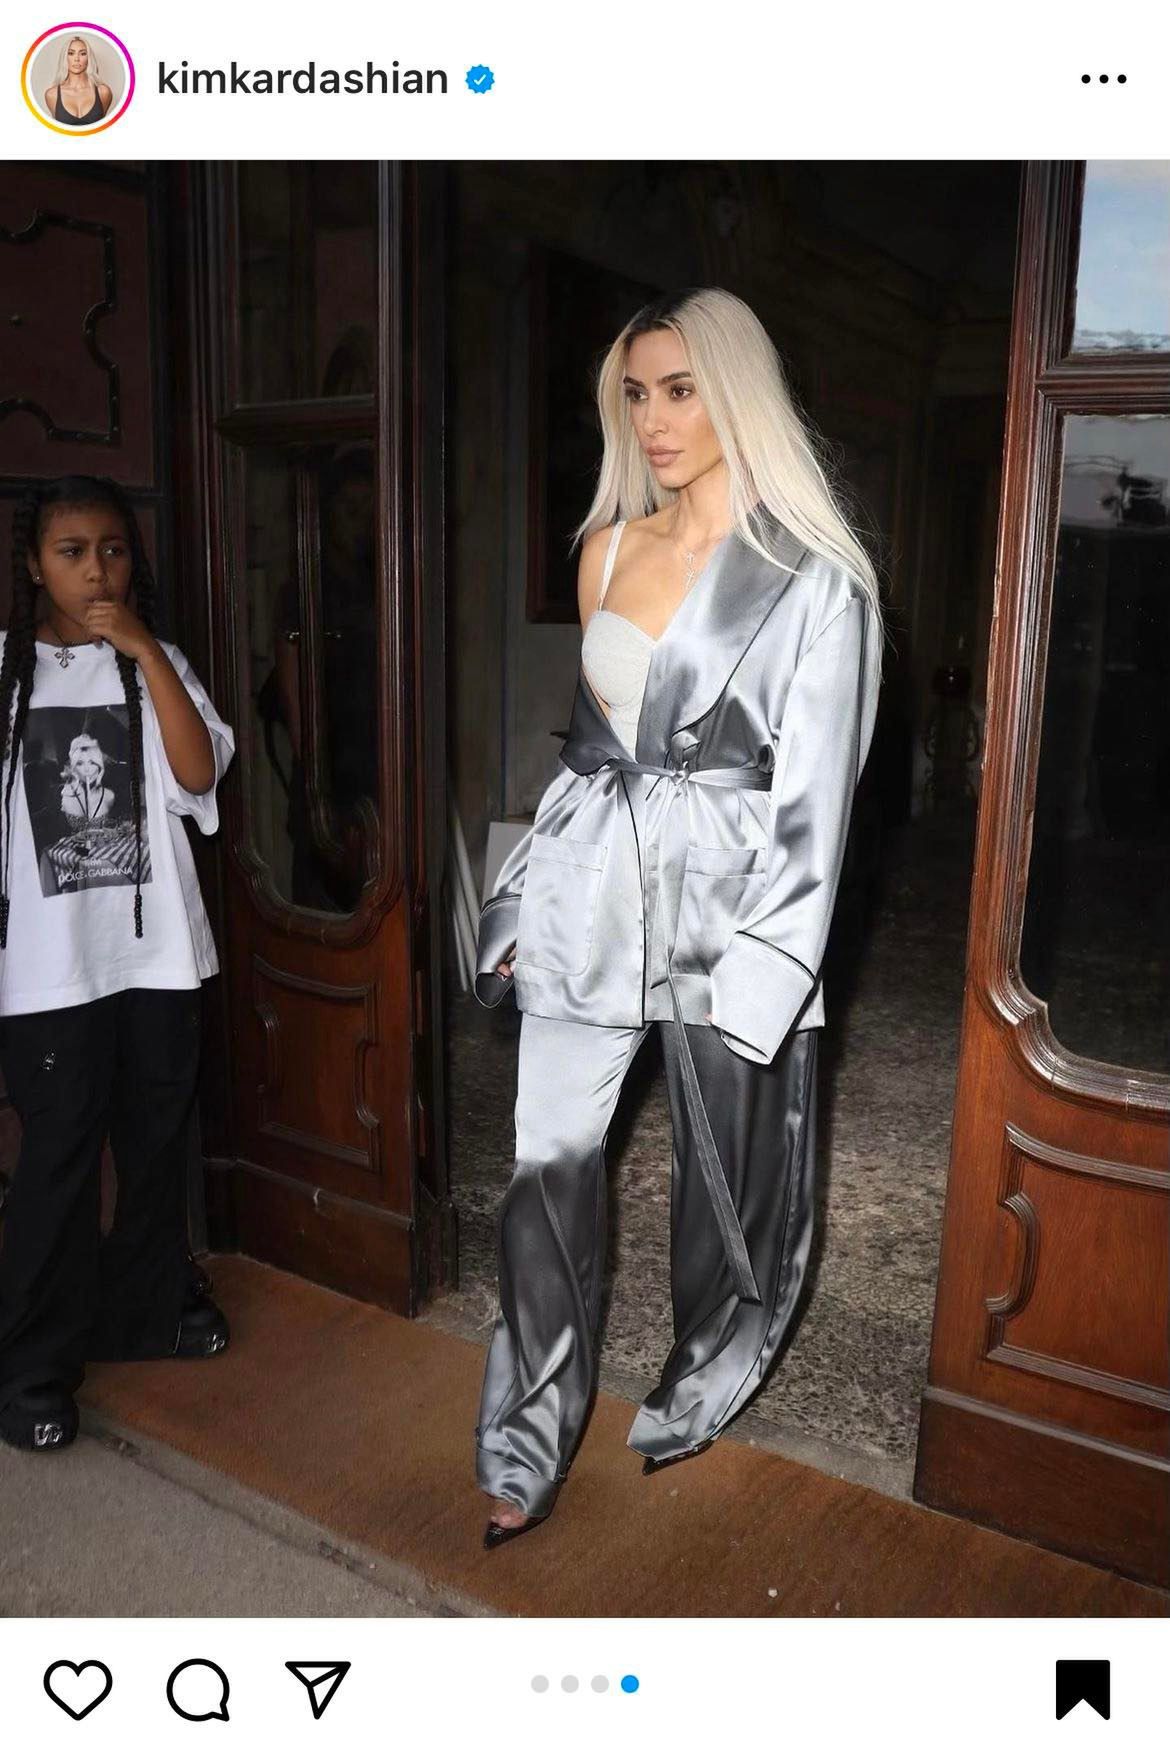 Kim Kardashian's daughter stole the attention in her photo.